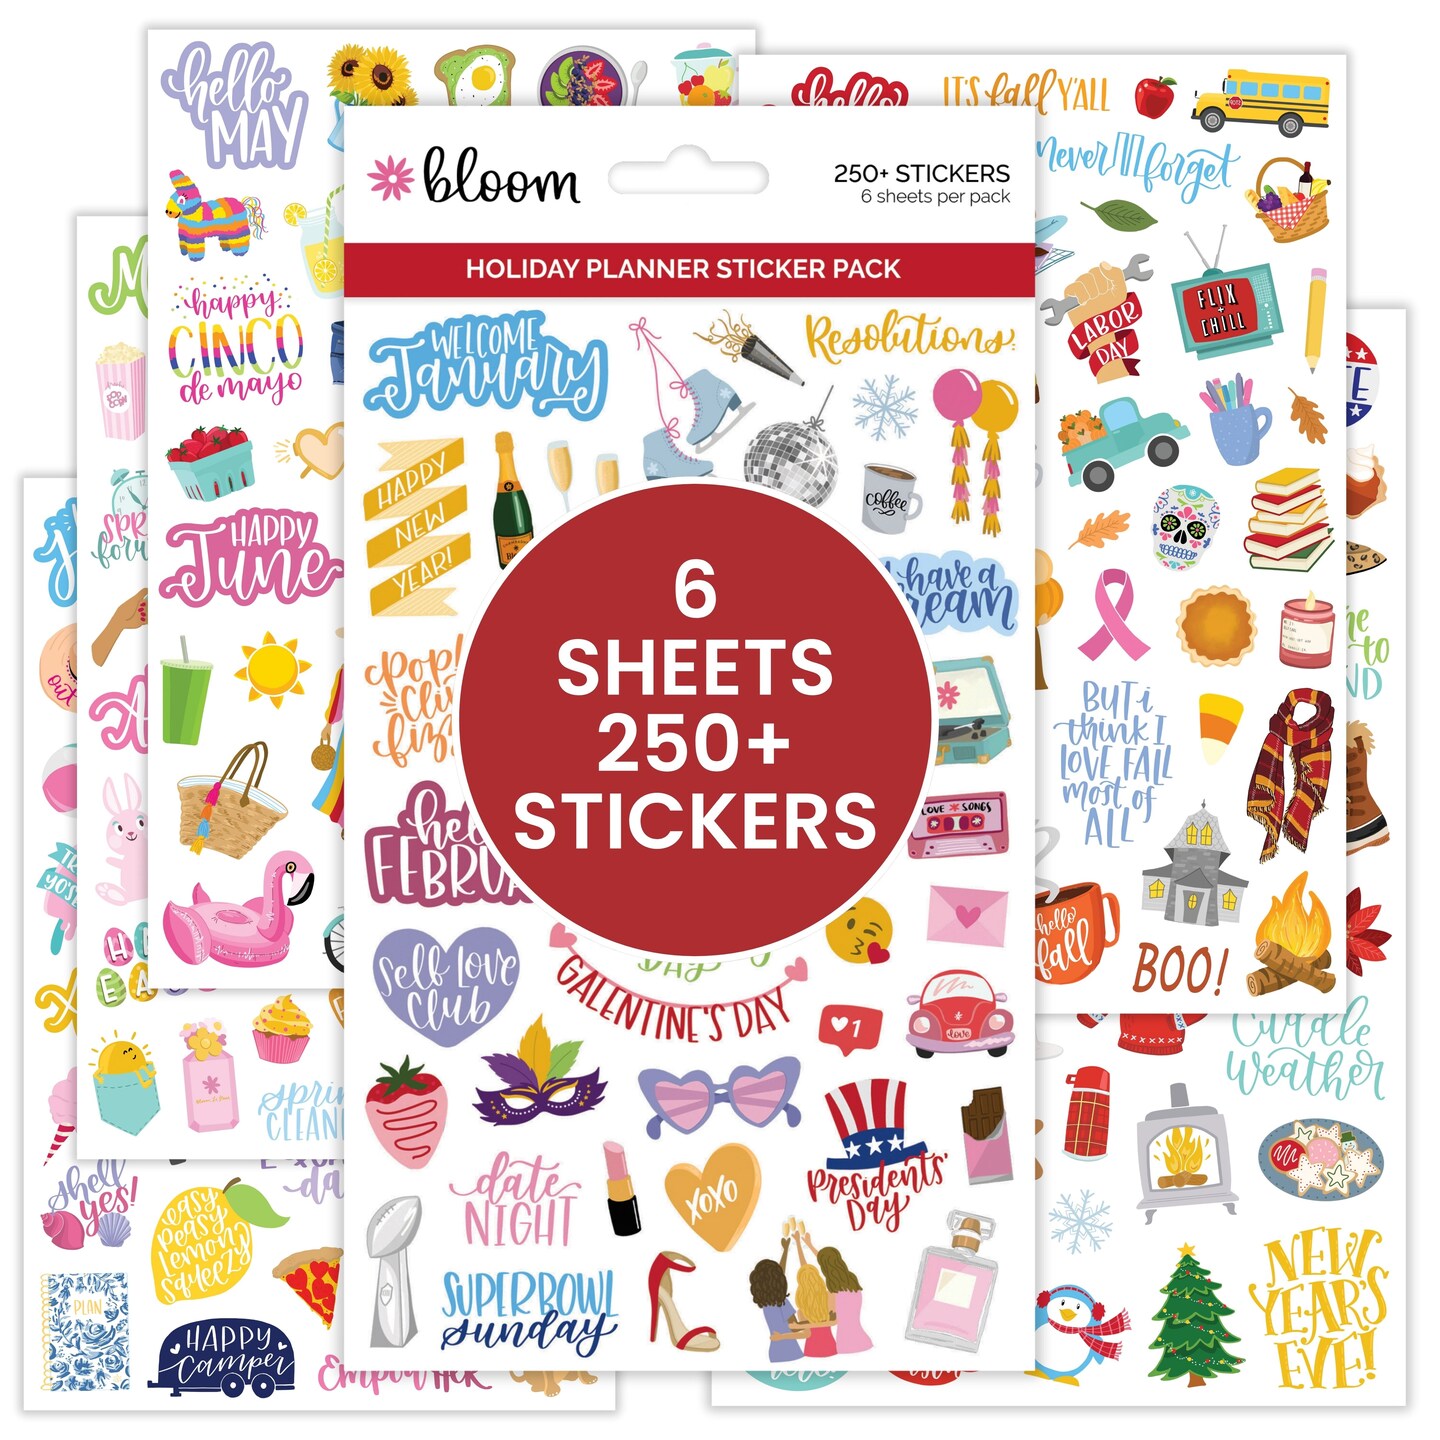 bloom daily planners Sticker Sheets, Holiday Planner Stickers